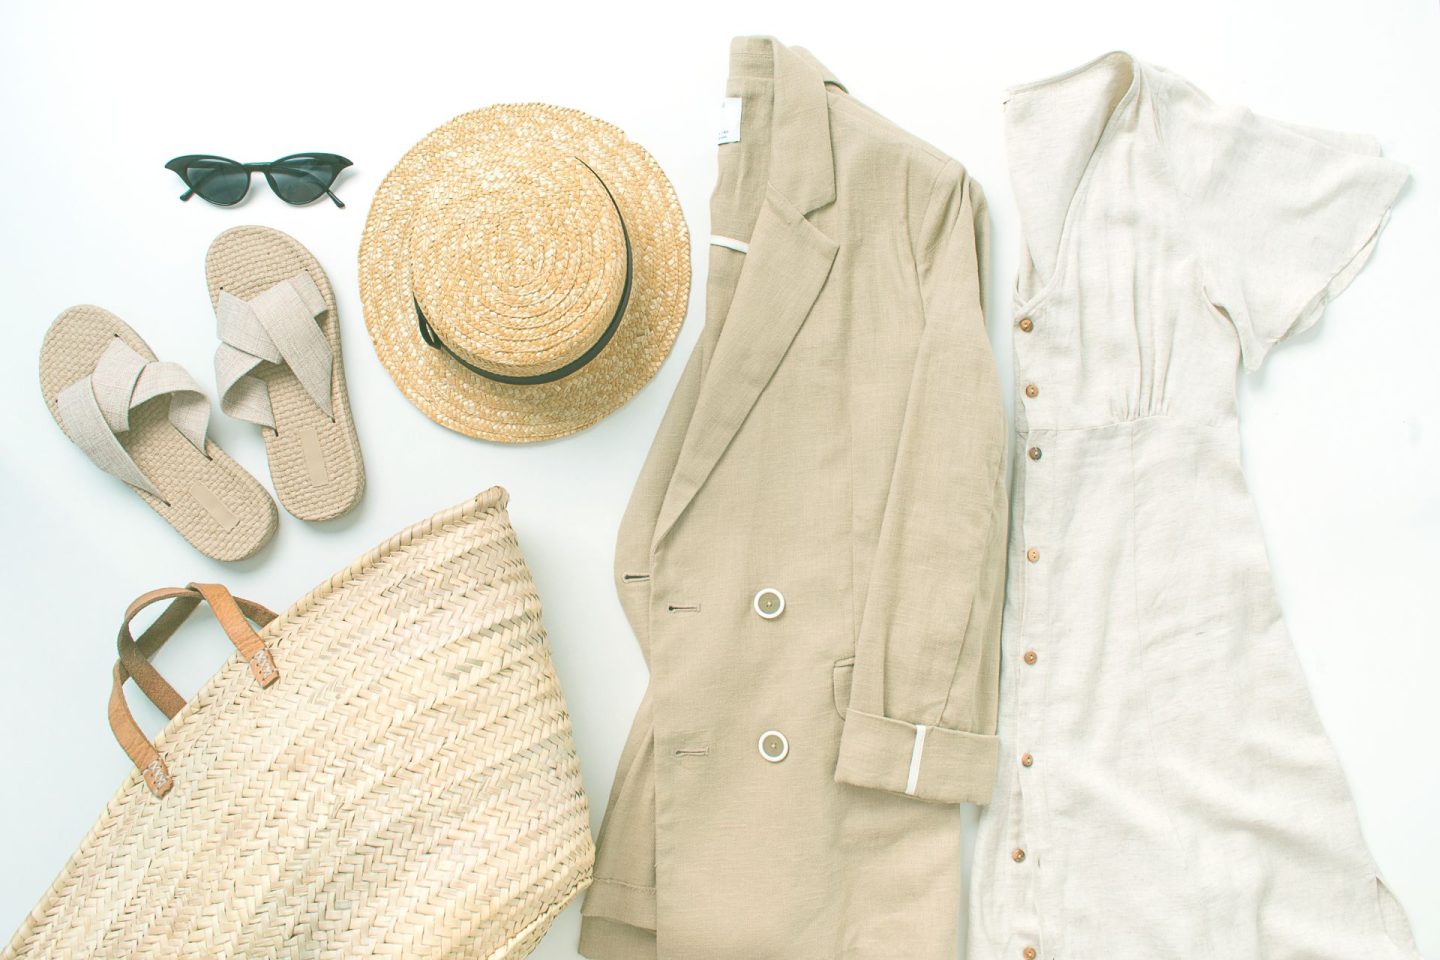 7 Styling Tips to Make the Same Outfit Look Different - Trendy Tourist